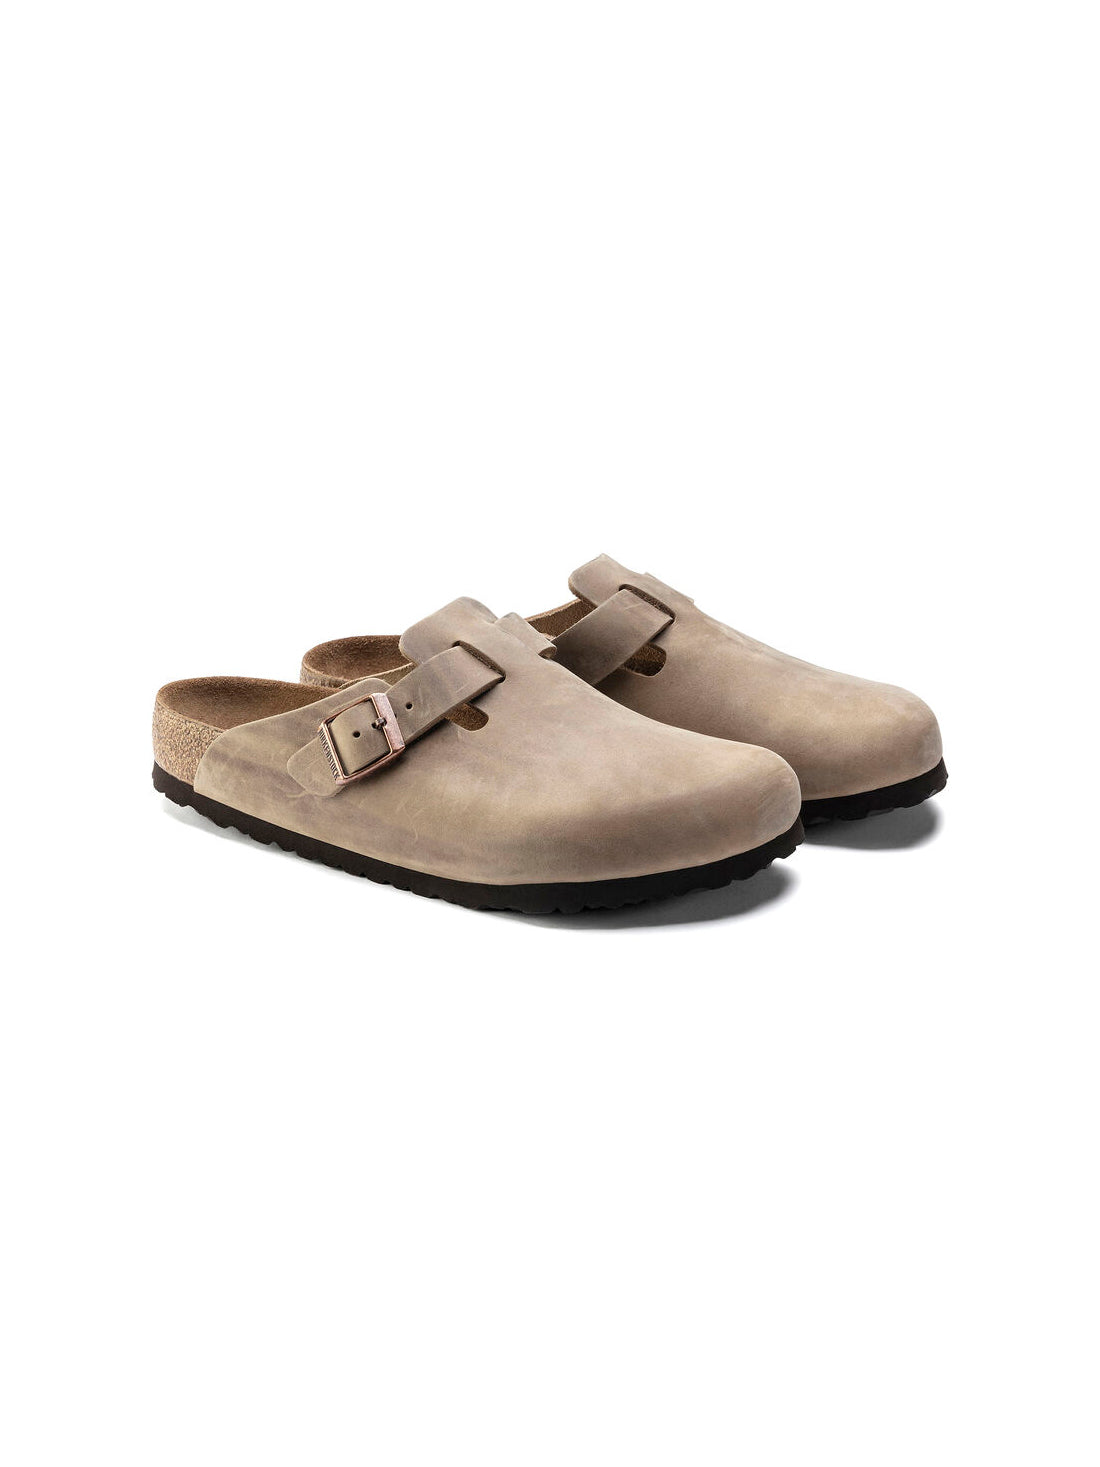 birkenstock boston clog soft footbed oiled leather in tobacco